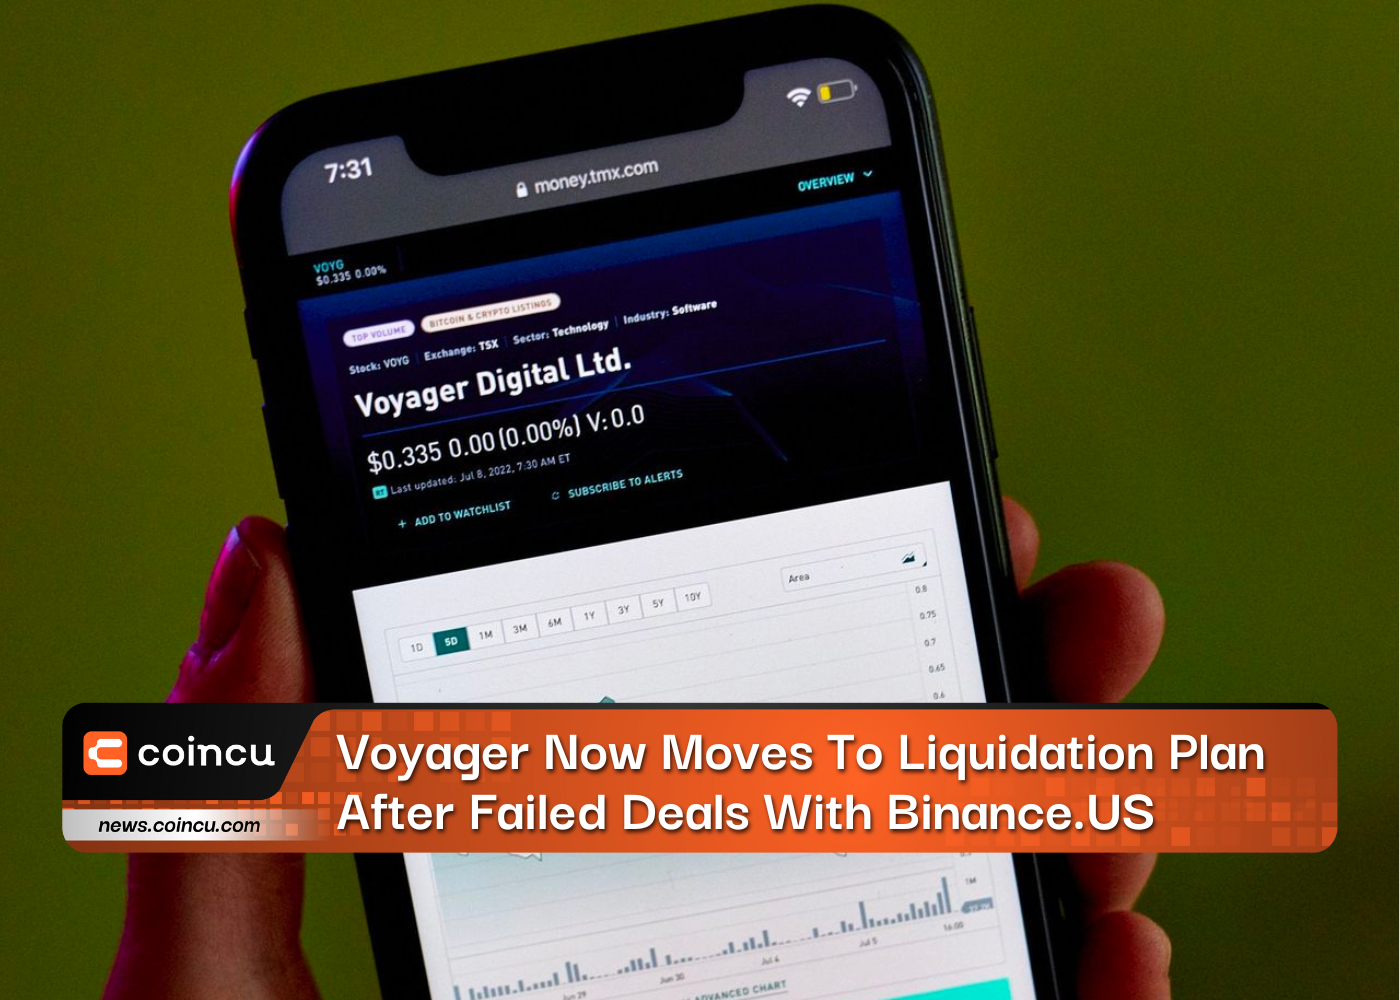 Voyager Now Moves To Liquidation Plan After Failed Deals With Binance.US